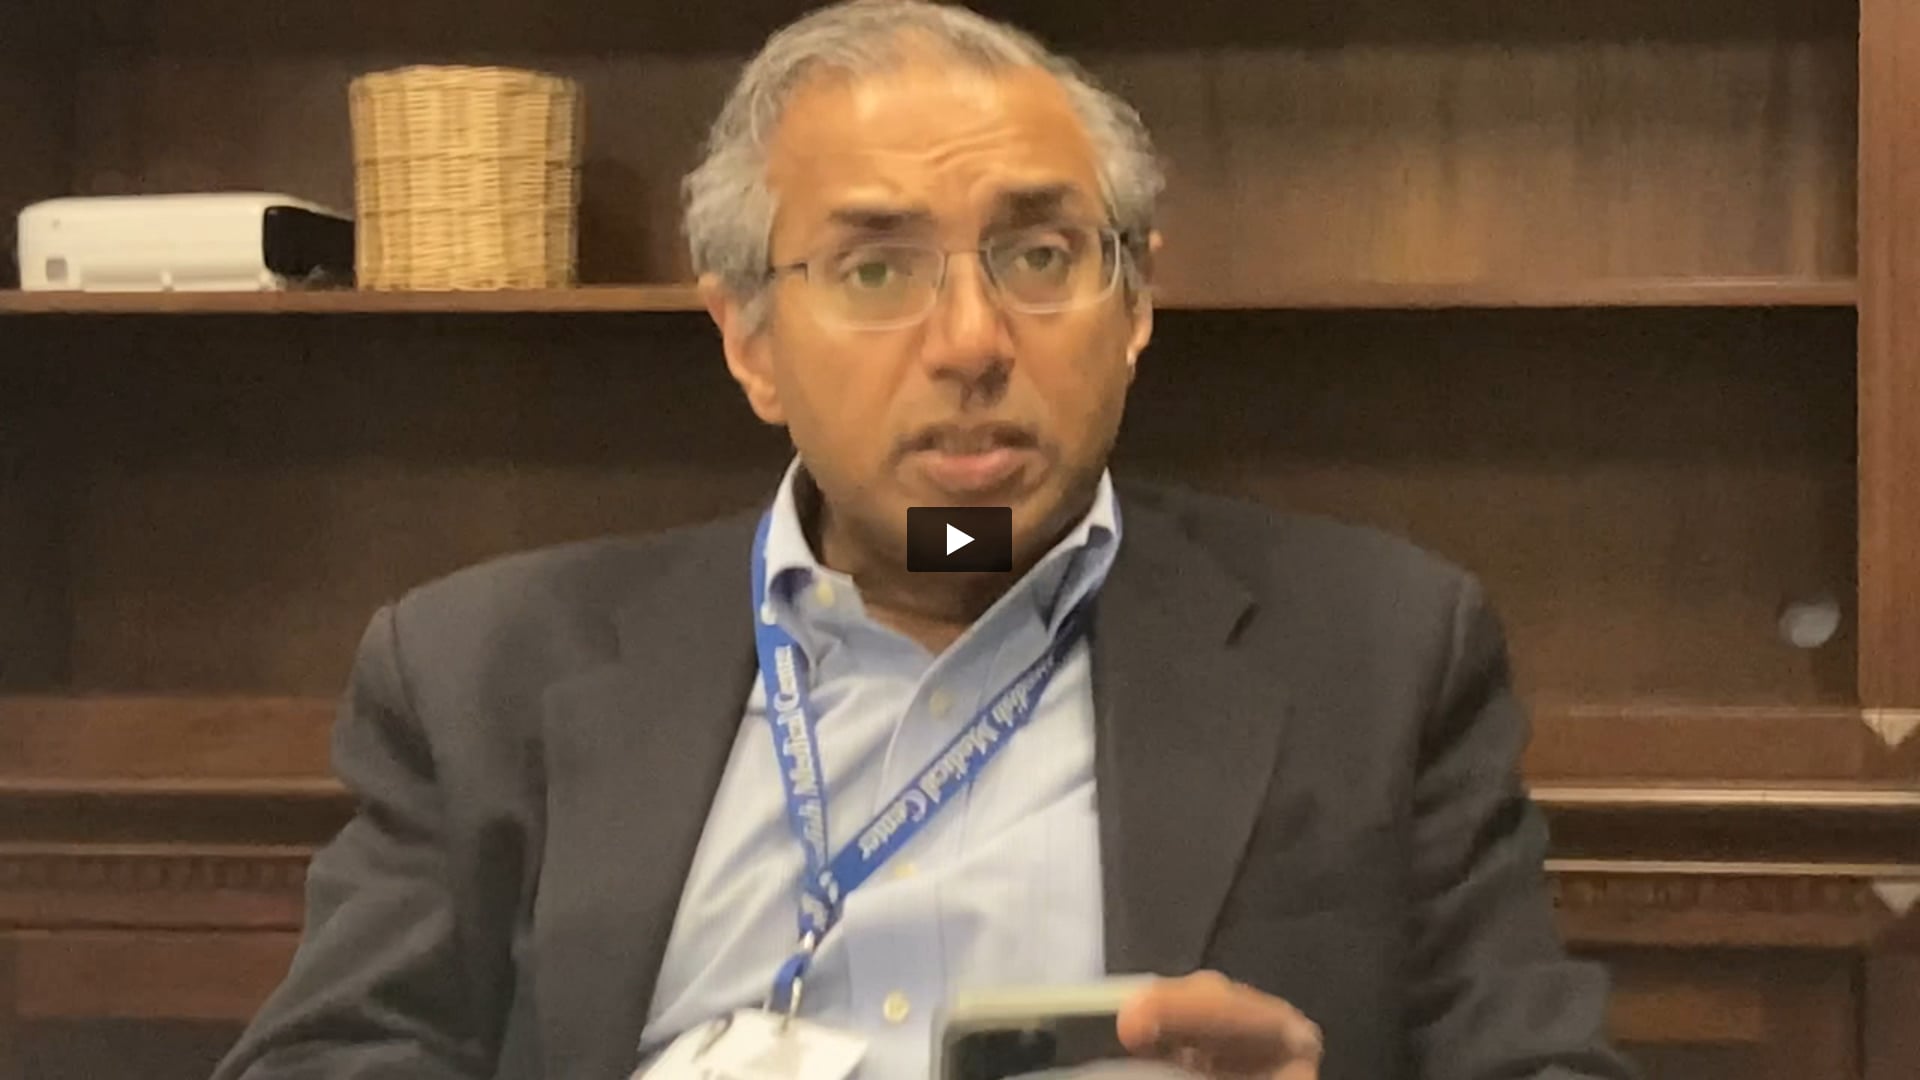 Dr. Rajeev Kumar on research and IRBs, pt. 1